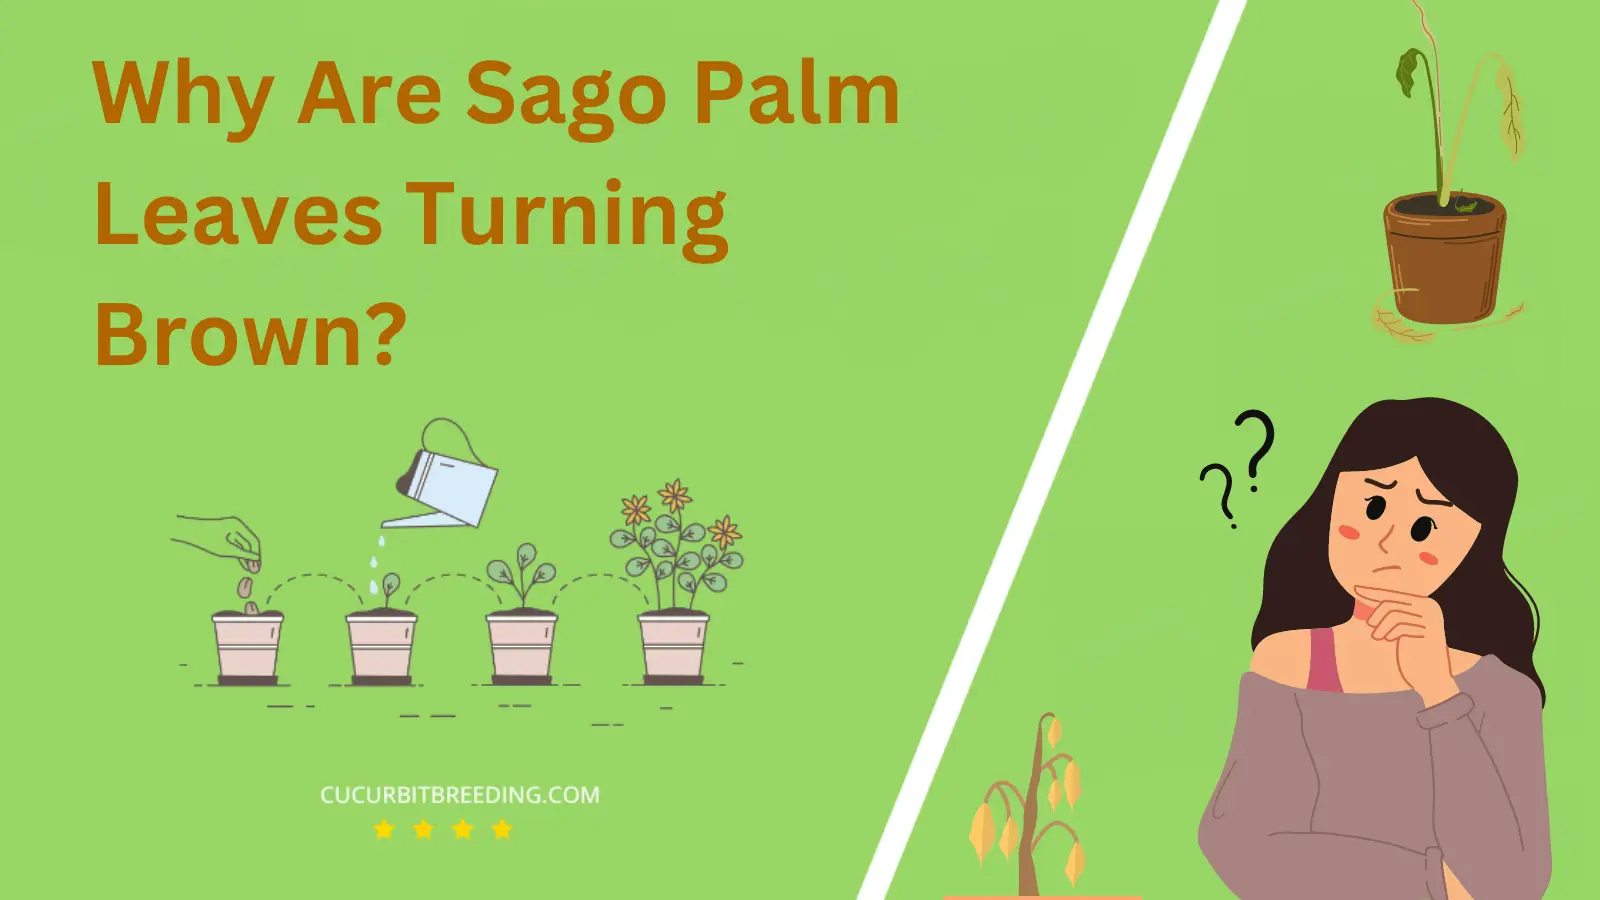 Why Are Sago Palm Leaves Turning Brown